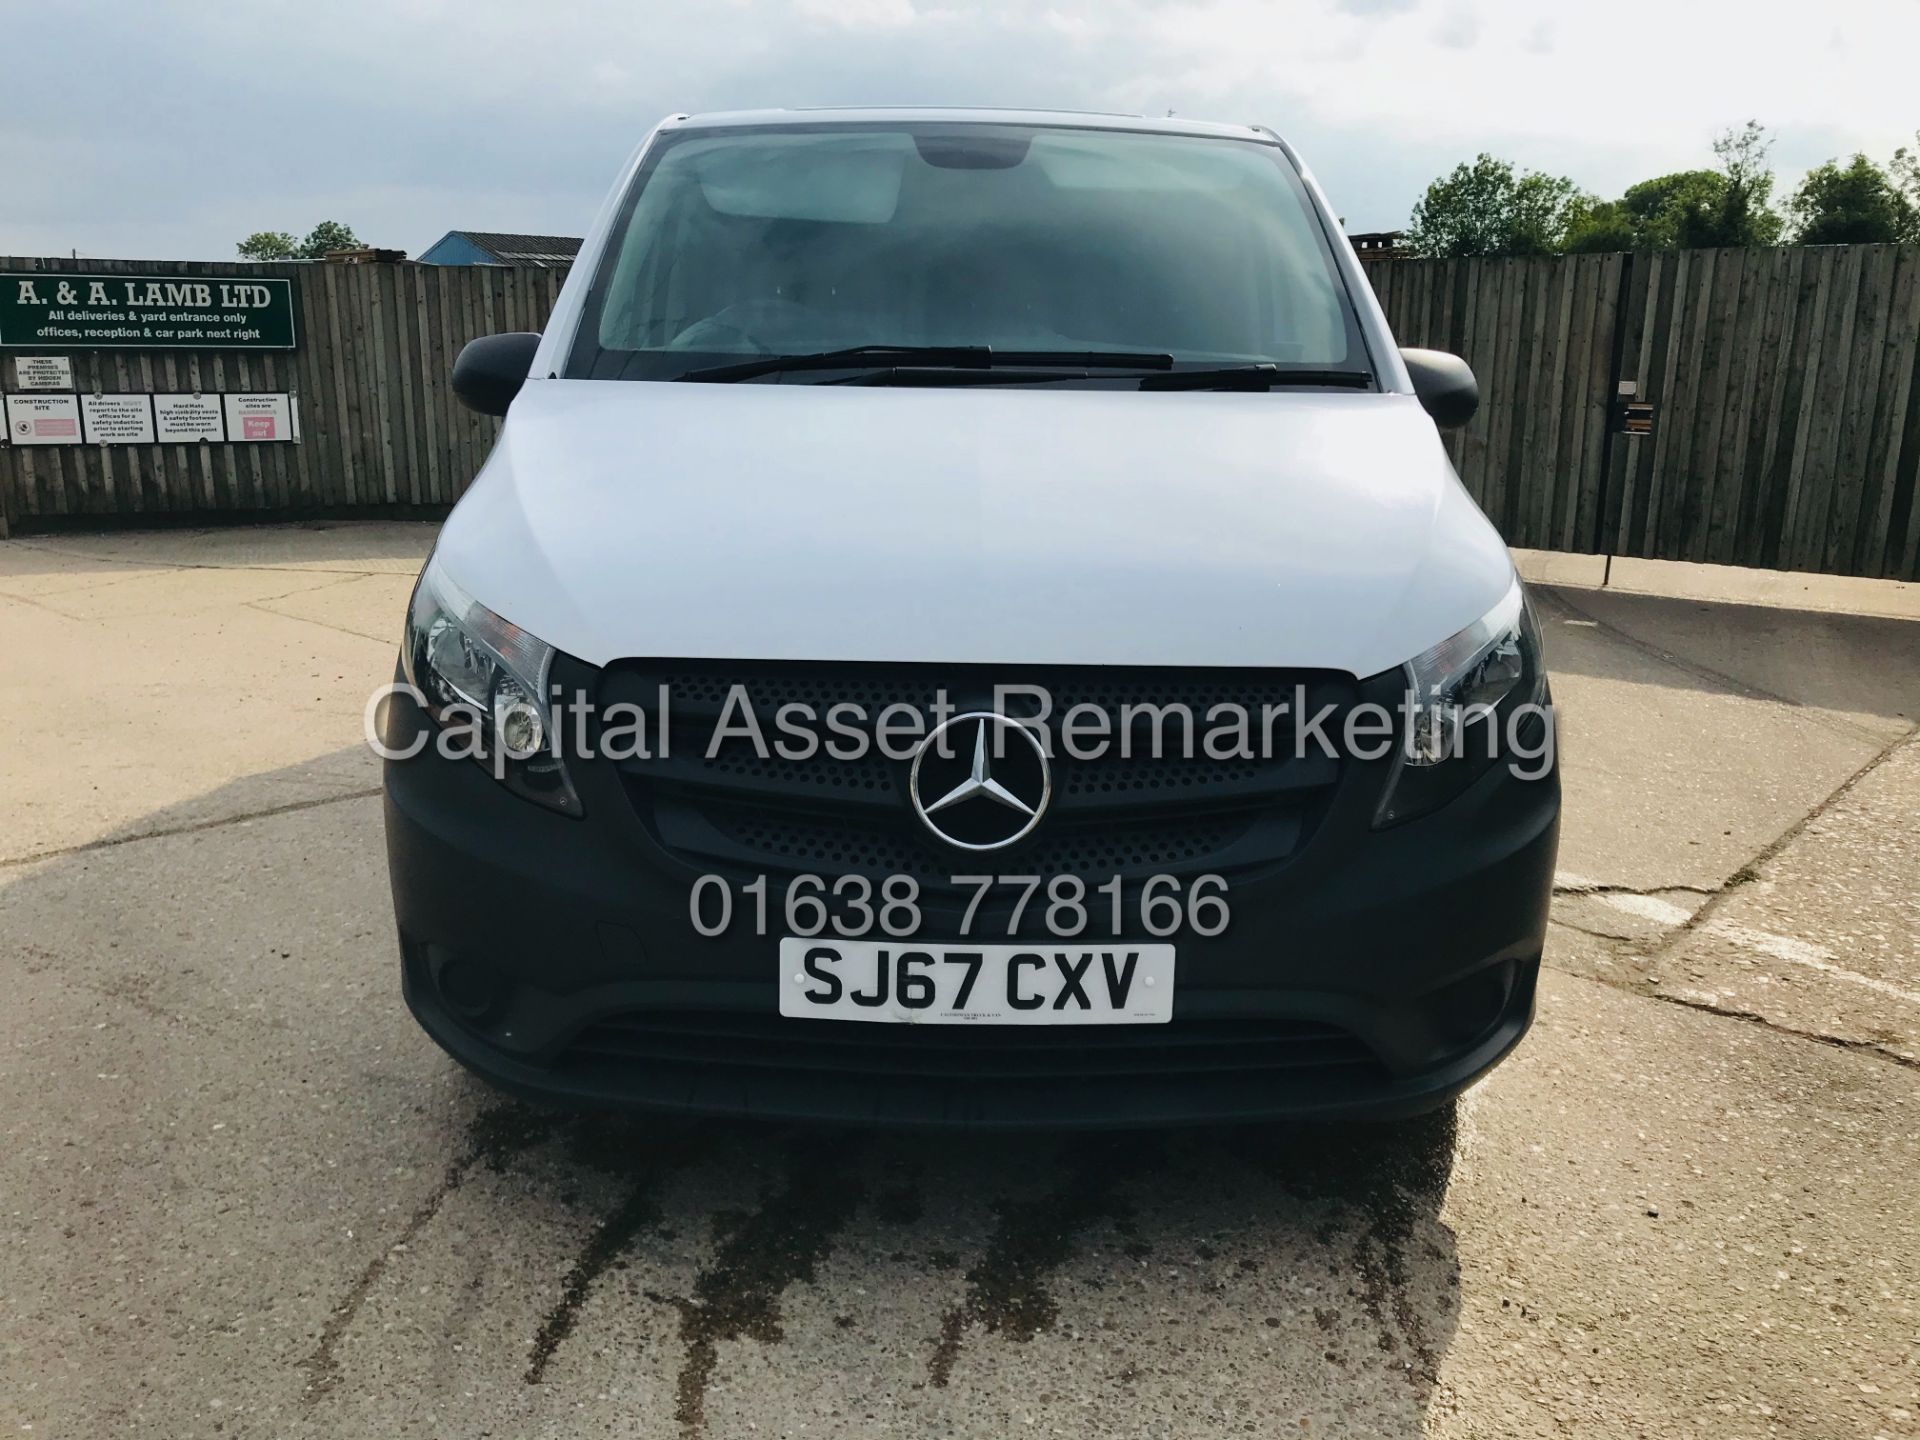 ON SALE MERCEDES VITO 111CDI "LWB" (2018 MODEL) 1 OWNER *AIR CON* ELEC PACK - CRUISE -*EURO 6* - Image 5 of 26